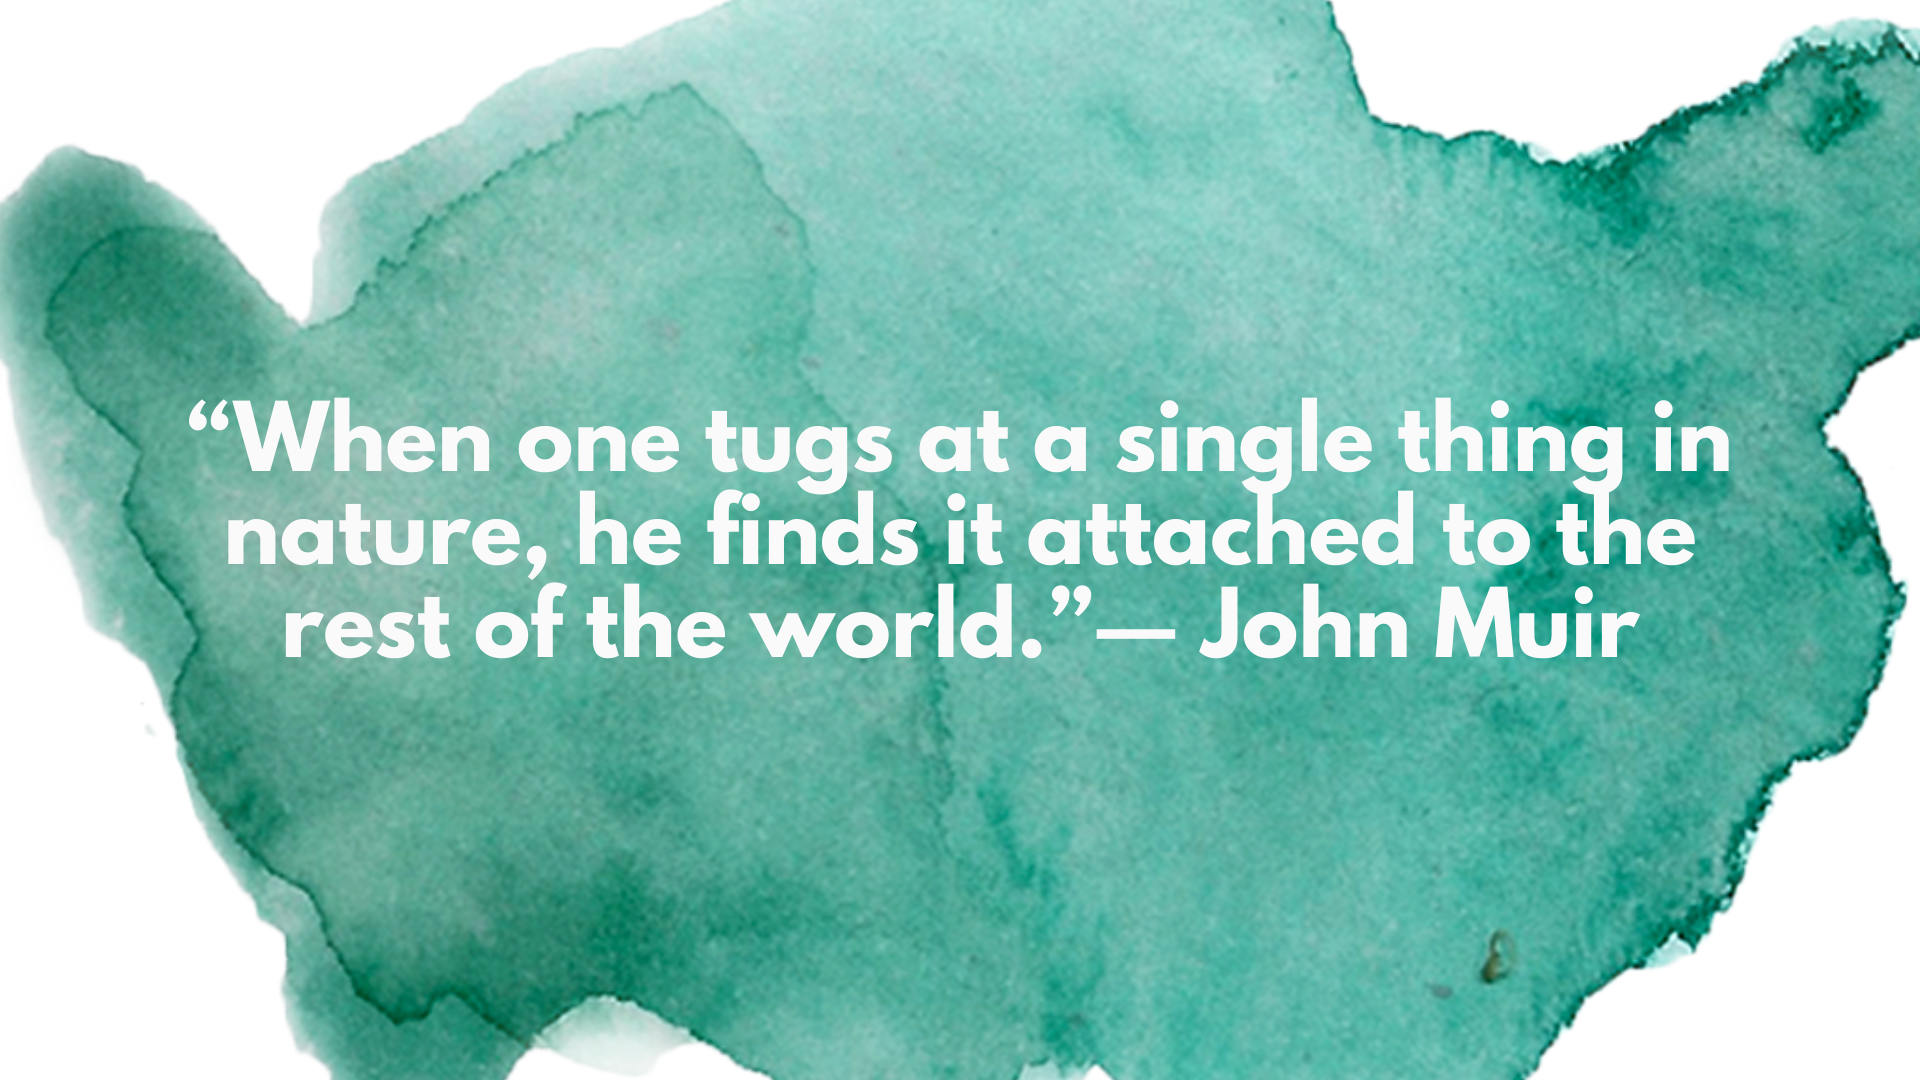 “When one tugs at a single thing in nature, he finds it attached to the rest of the world.” ― John Muir